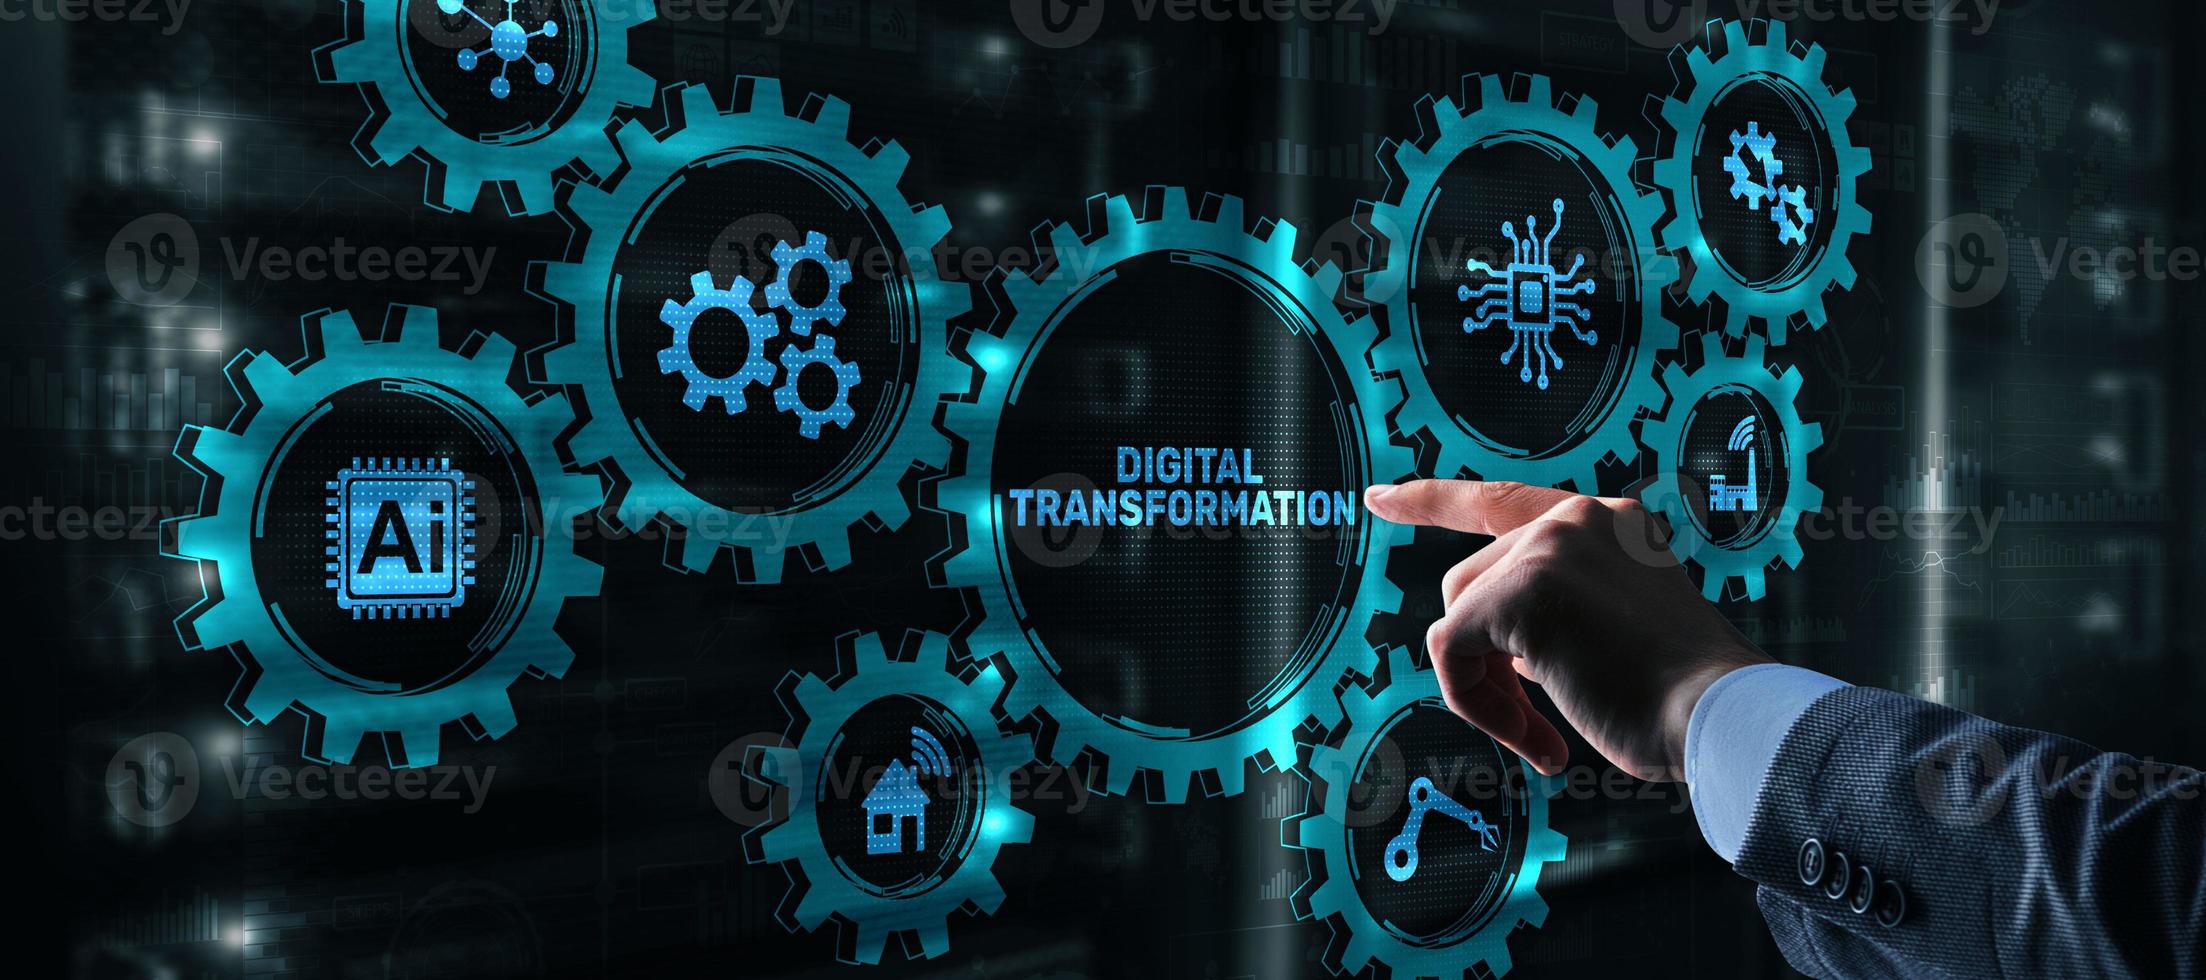 Digital Transformation and Digitalization Technology concept on Abstract Background photo